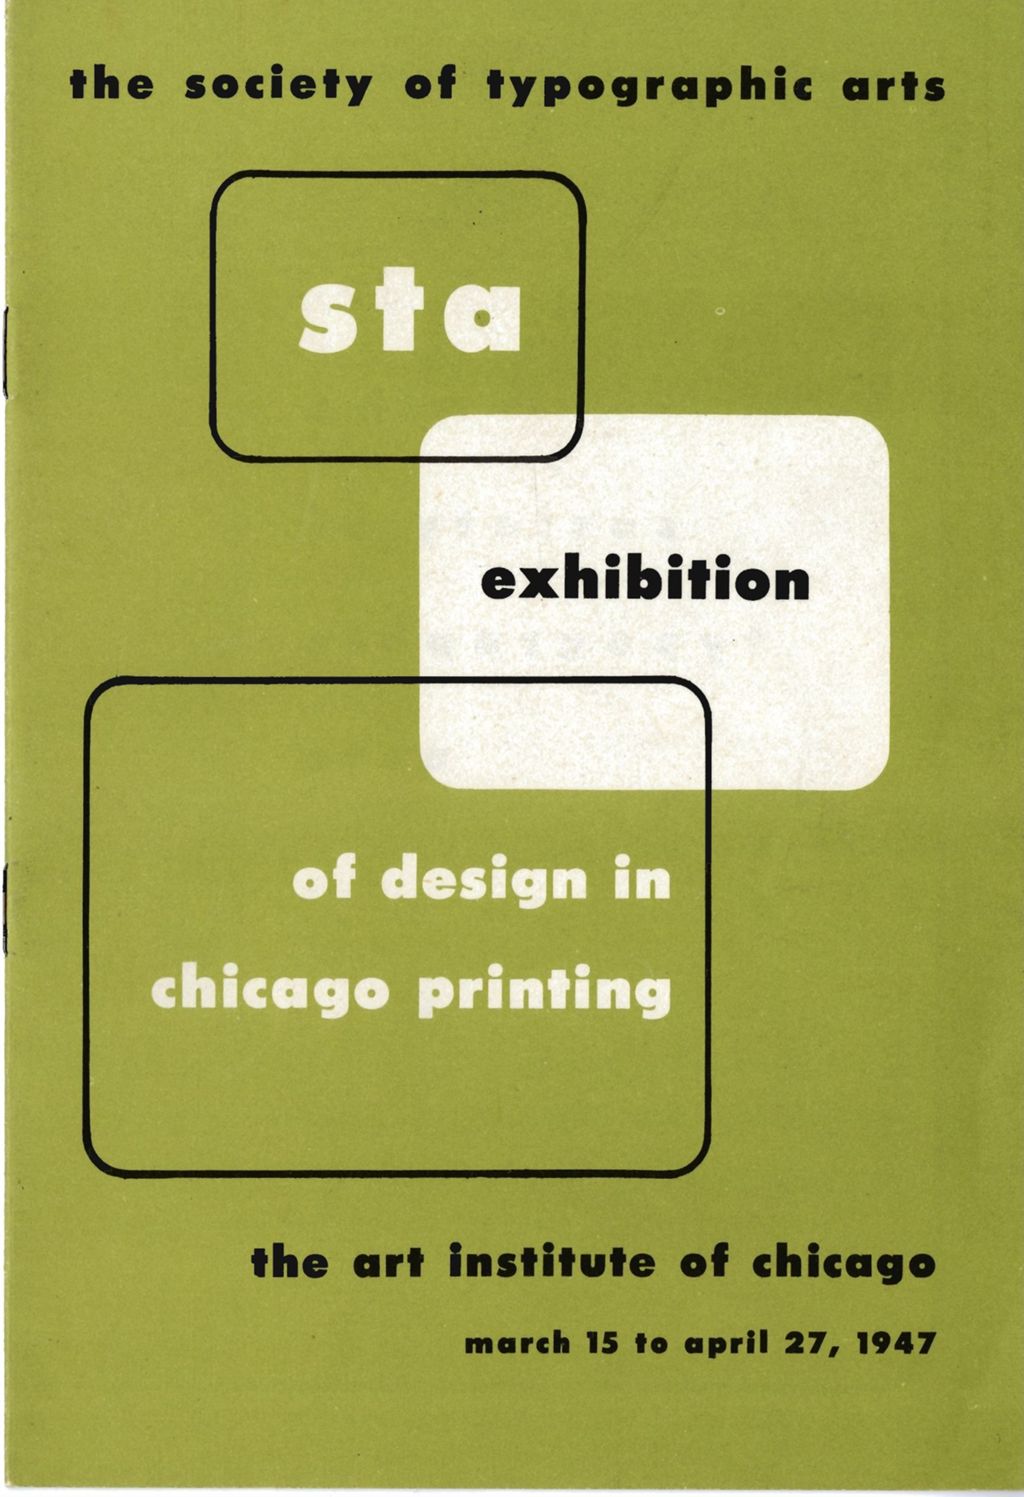 The Society of Typographic Arts 20th Annual Exhibition of Design in Chicago Printing